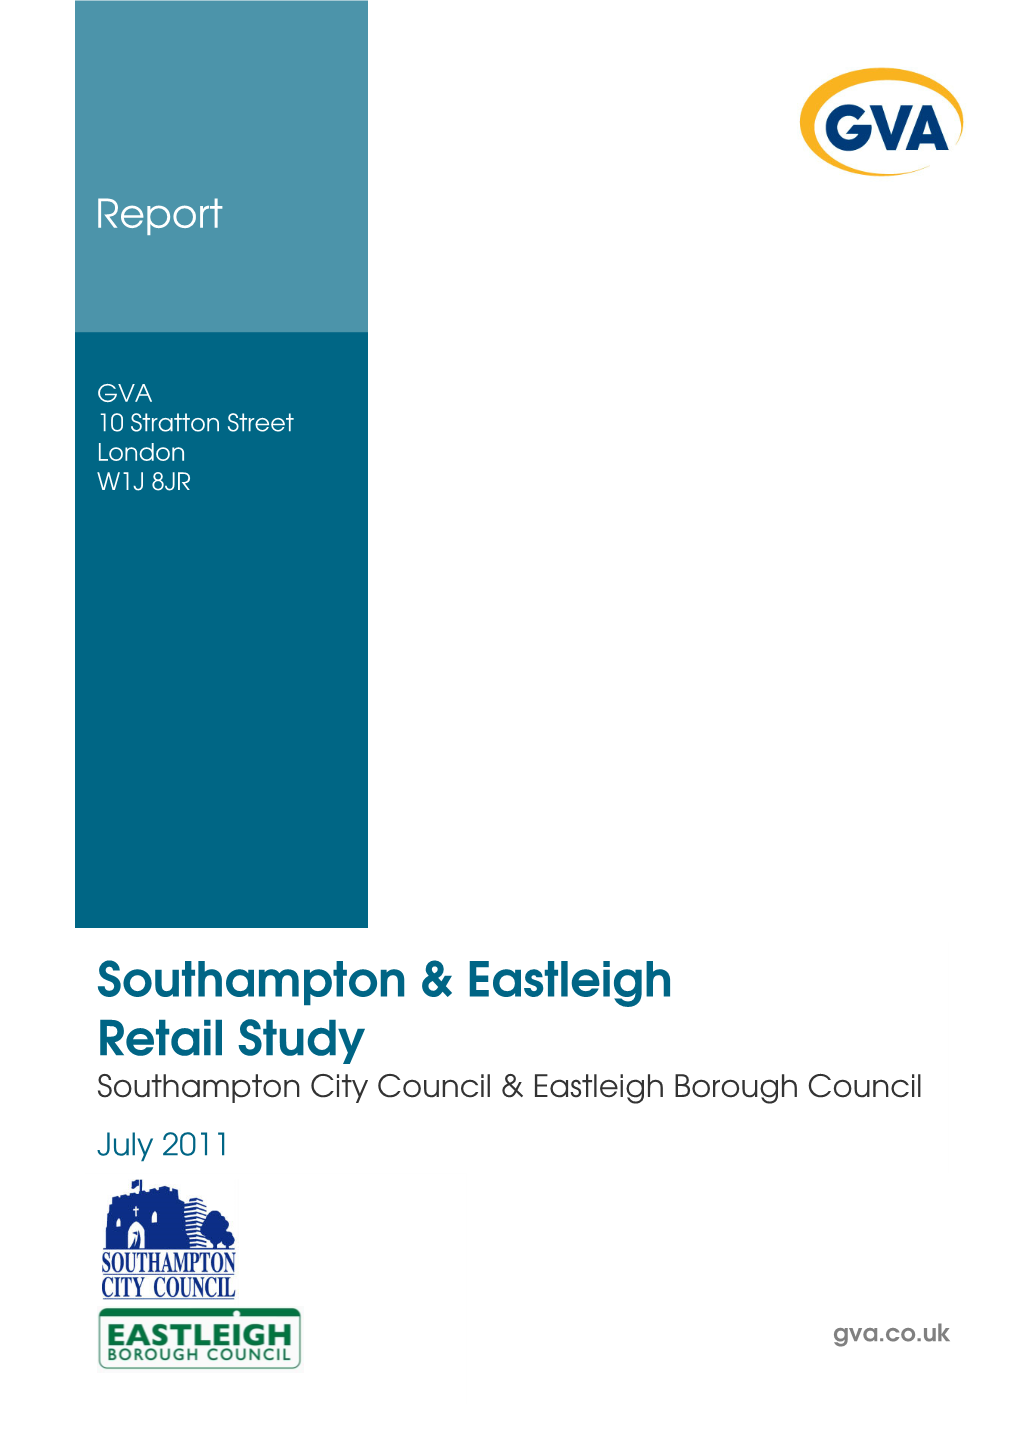 Southampton and Eastleigh Retail Study July 2011